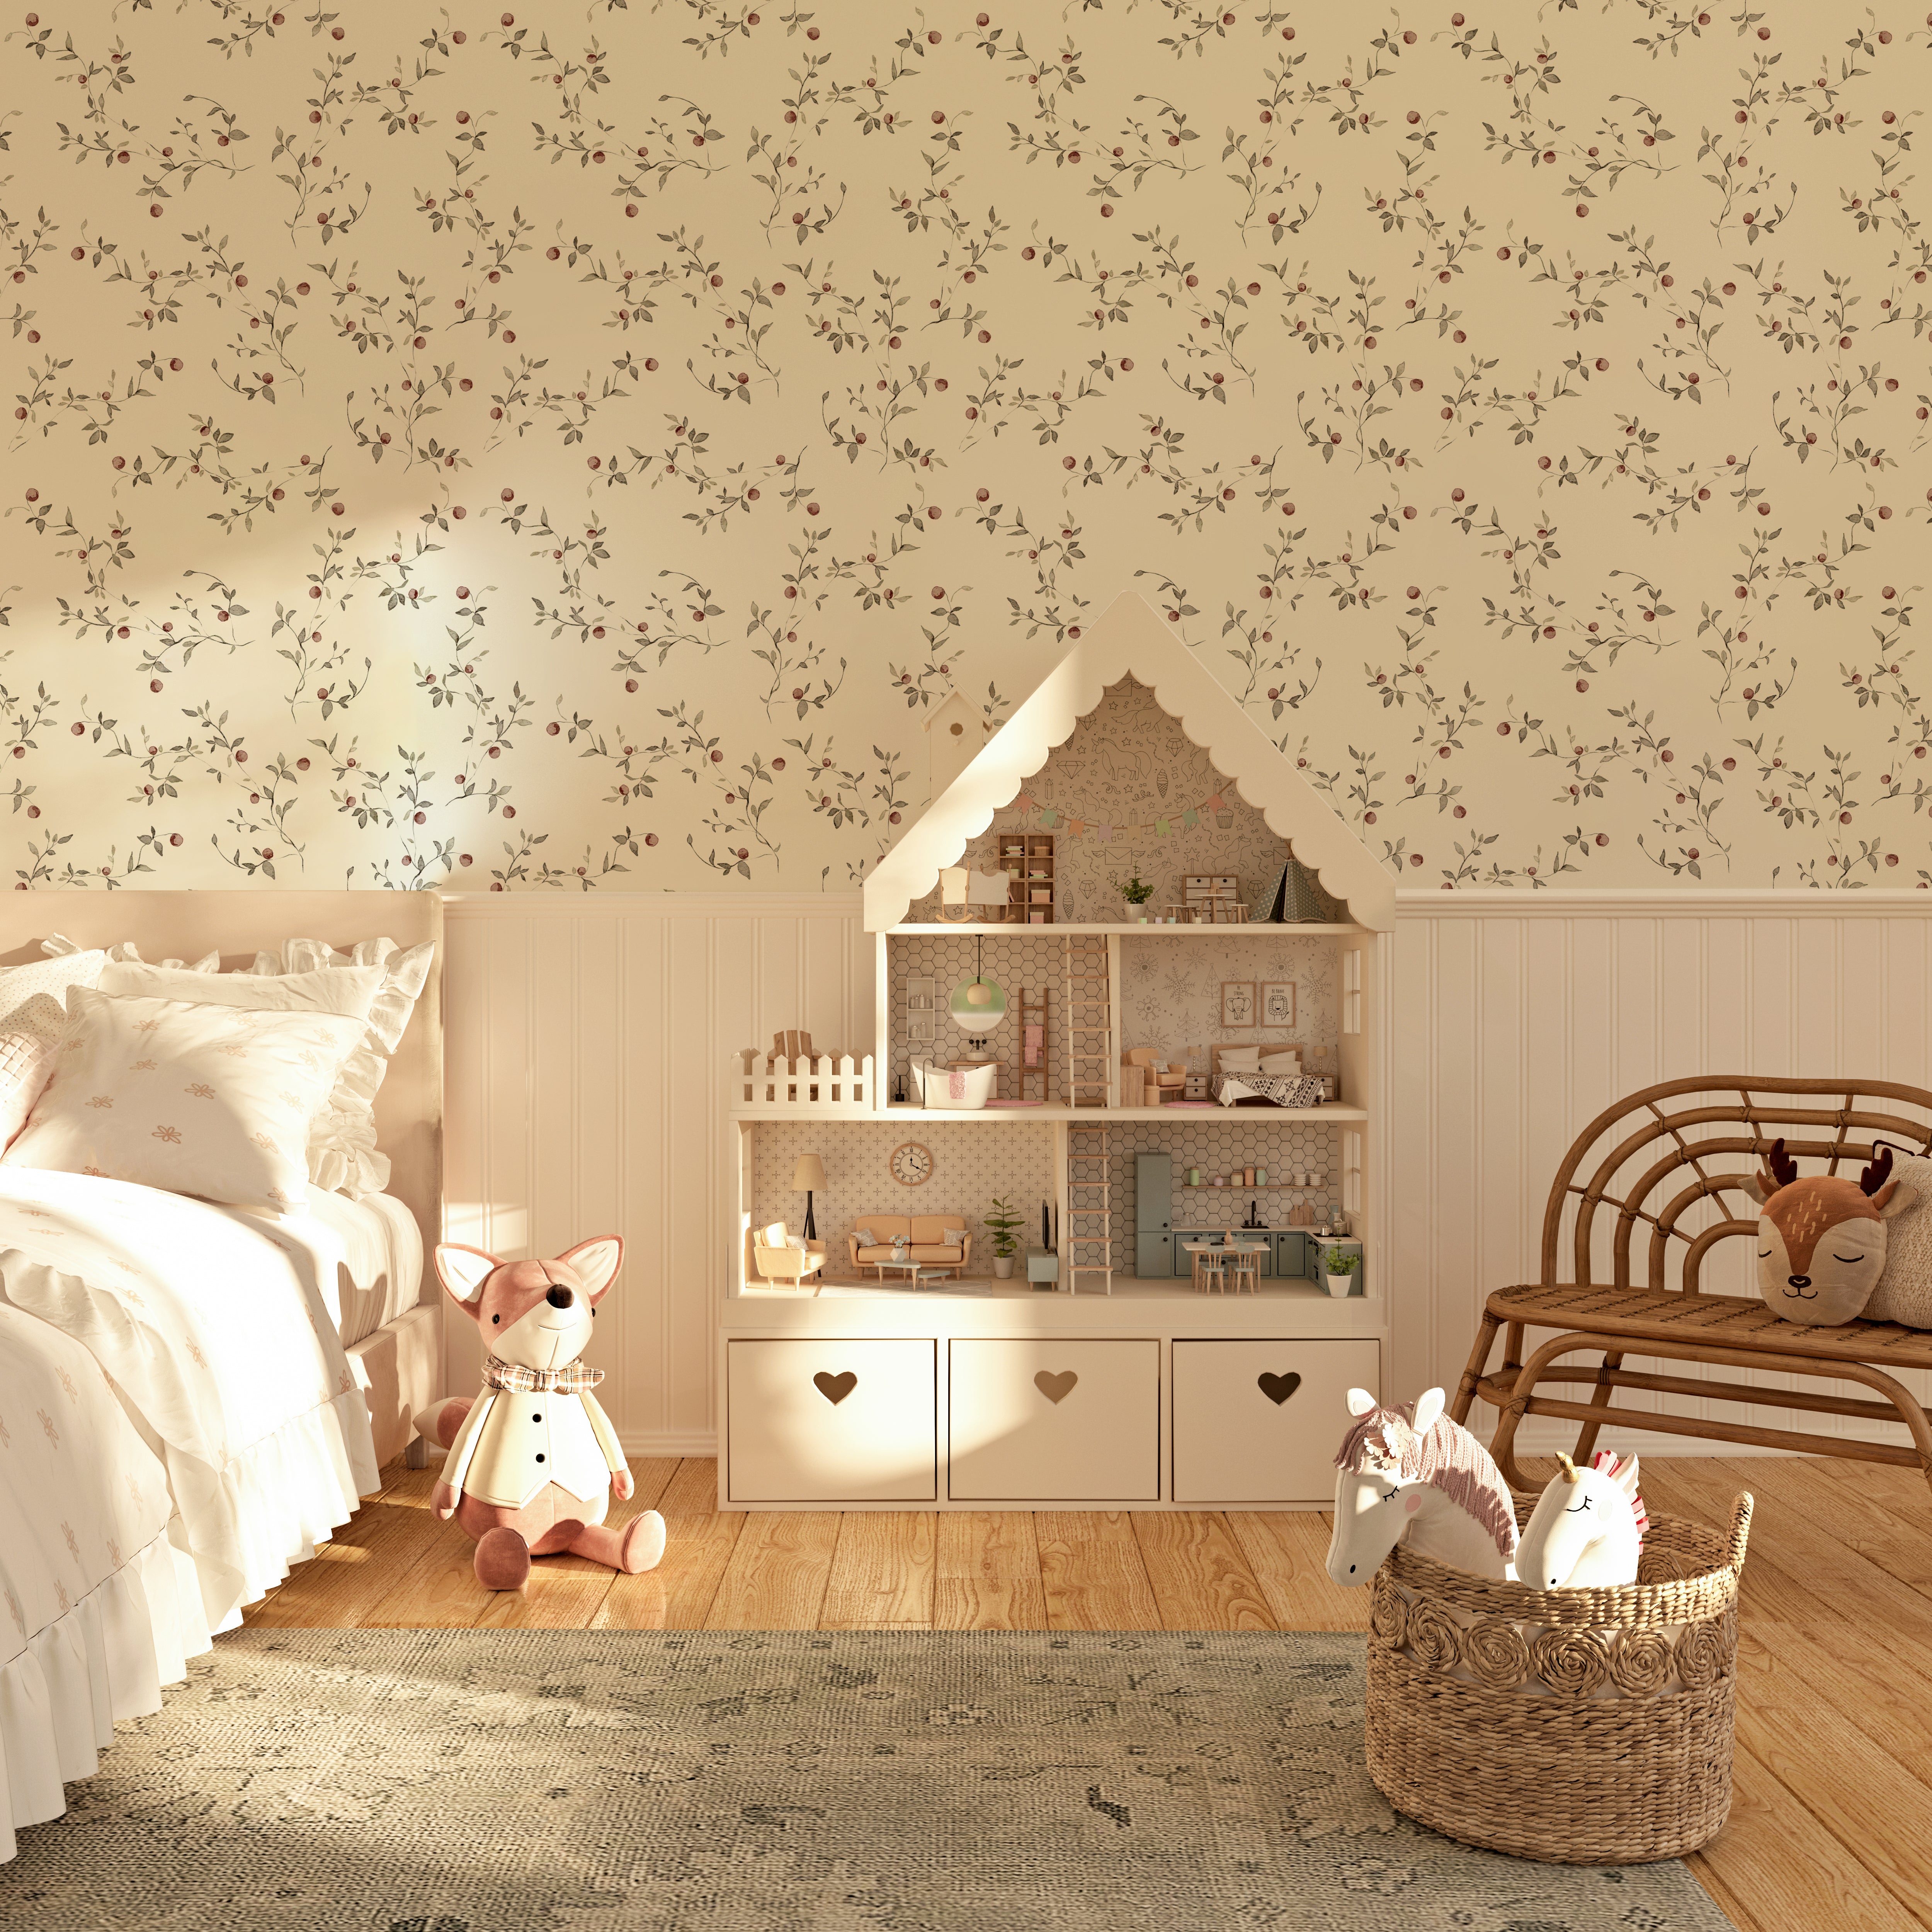 Children's bedroom with Cranberry Branches Wallpaper, displaying a charming dollhouse and a wicker chair. The wallpaper has a delicate pattern of cranberry branches with small berries and leaves, creating a warm and inviting atmosphere